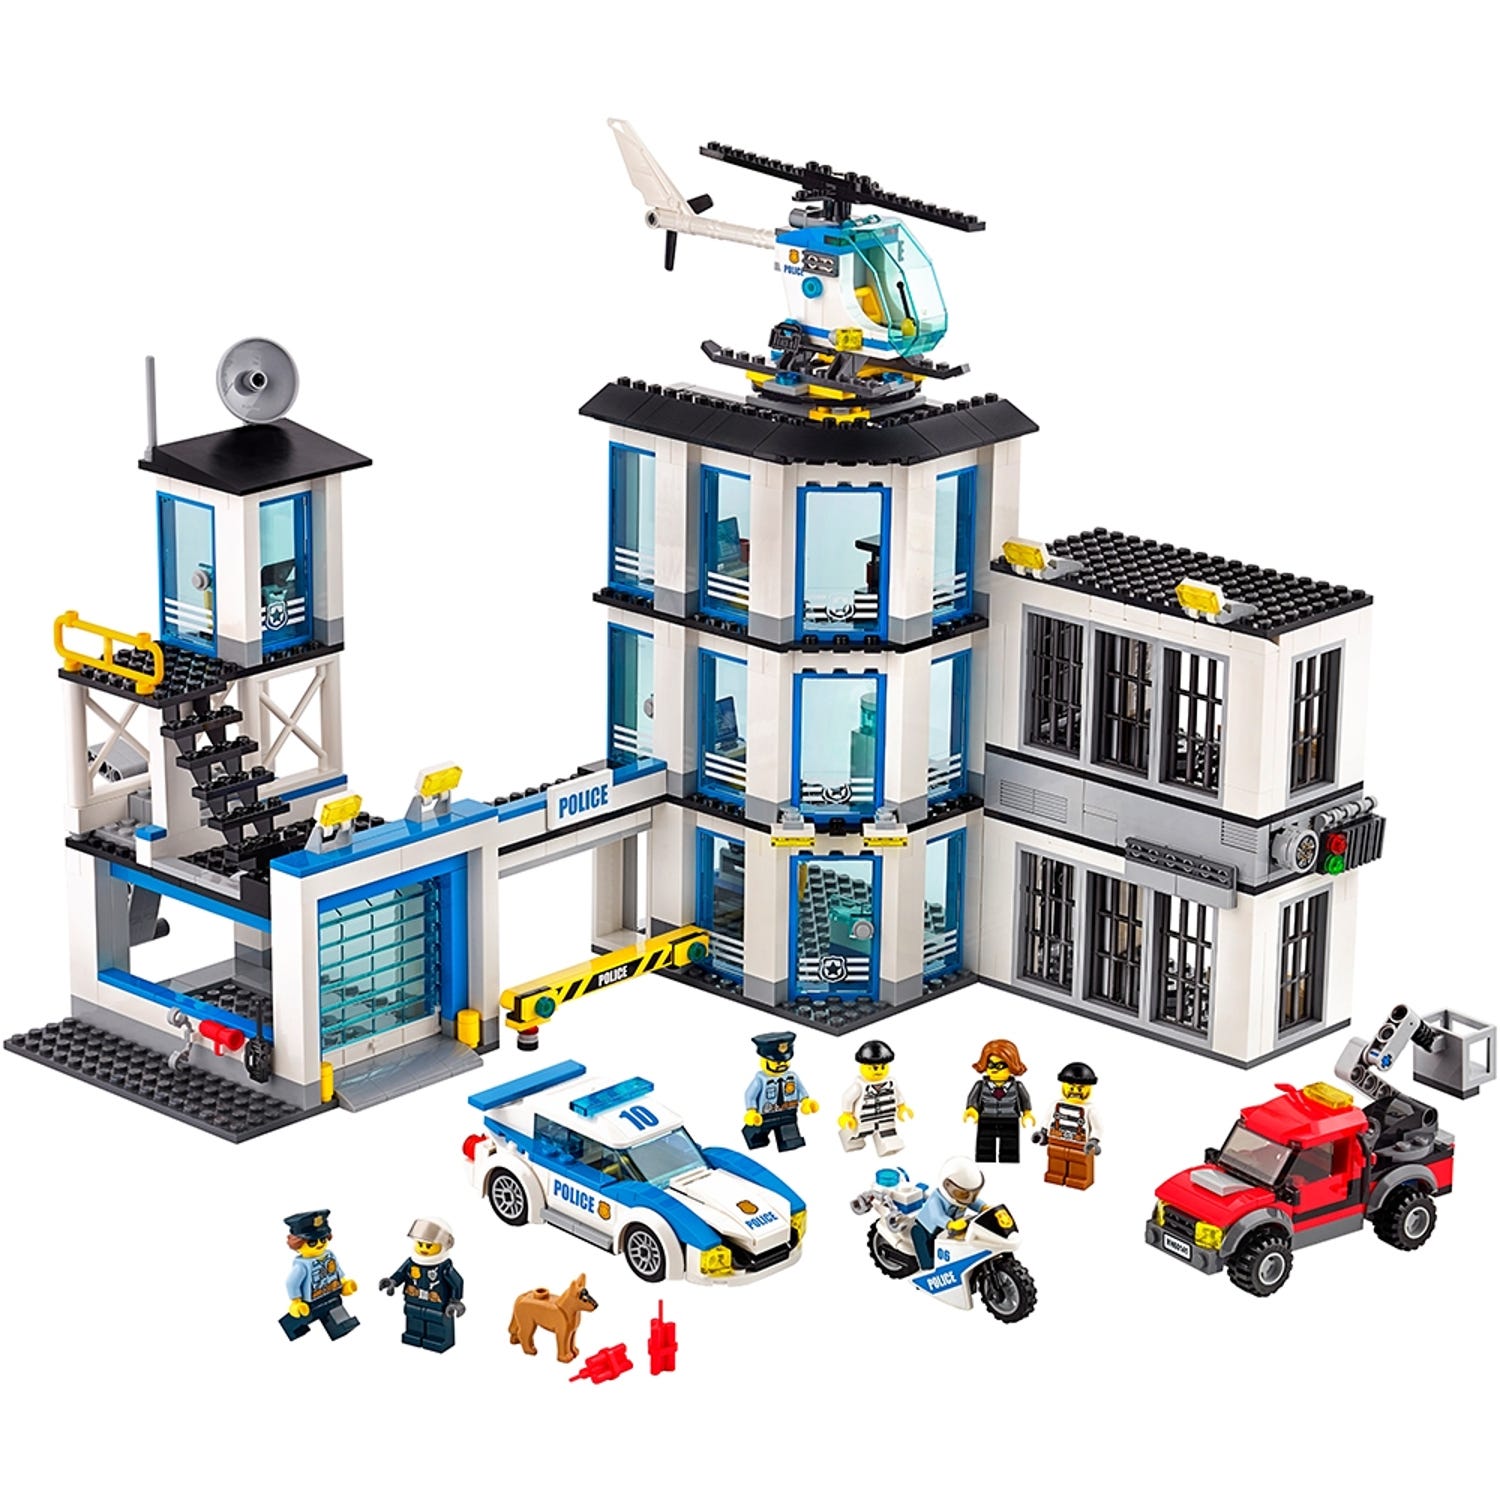 Police Station 60141 | City | Buy online at Official LEGO® US